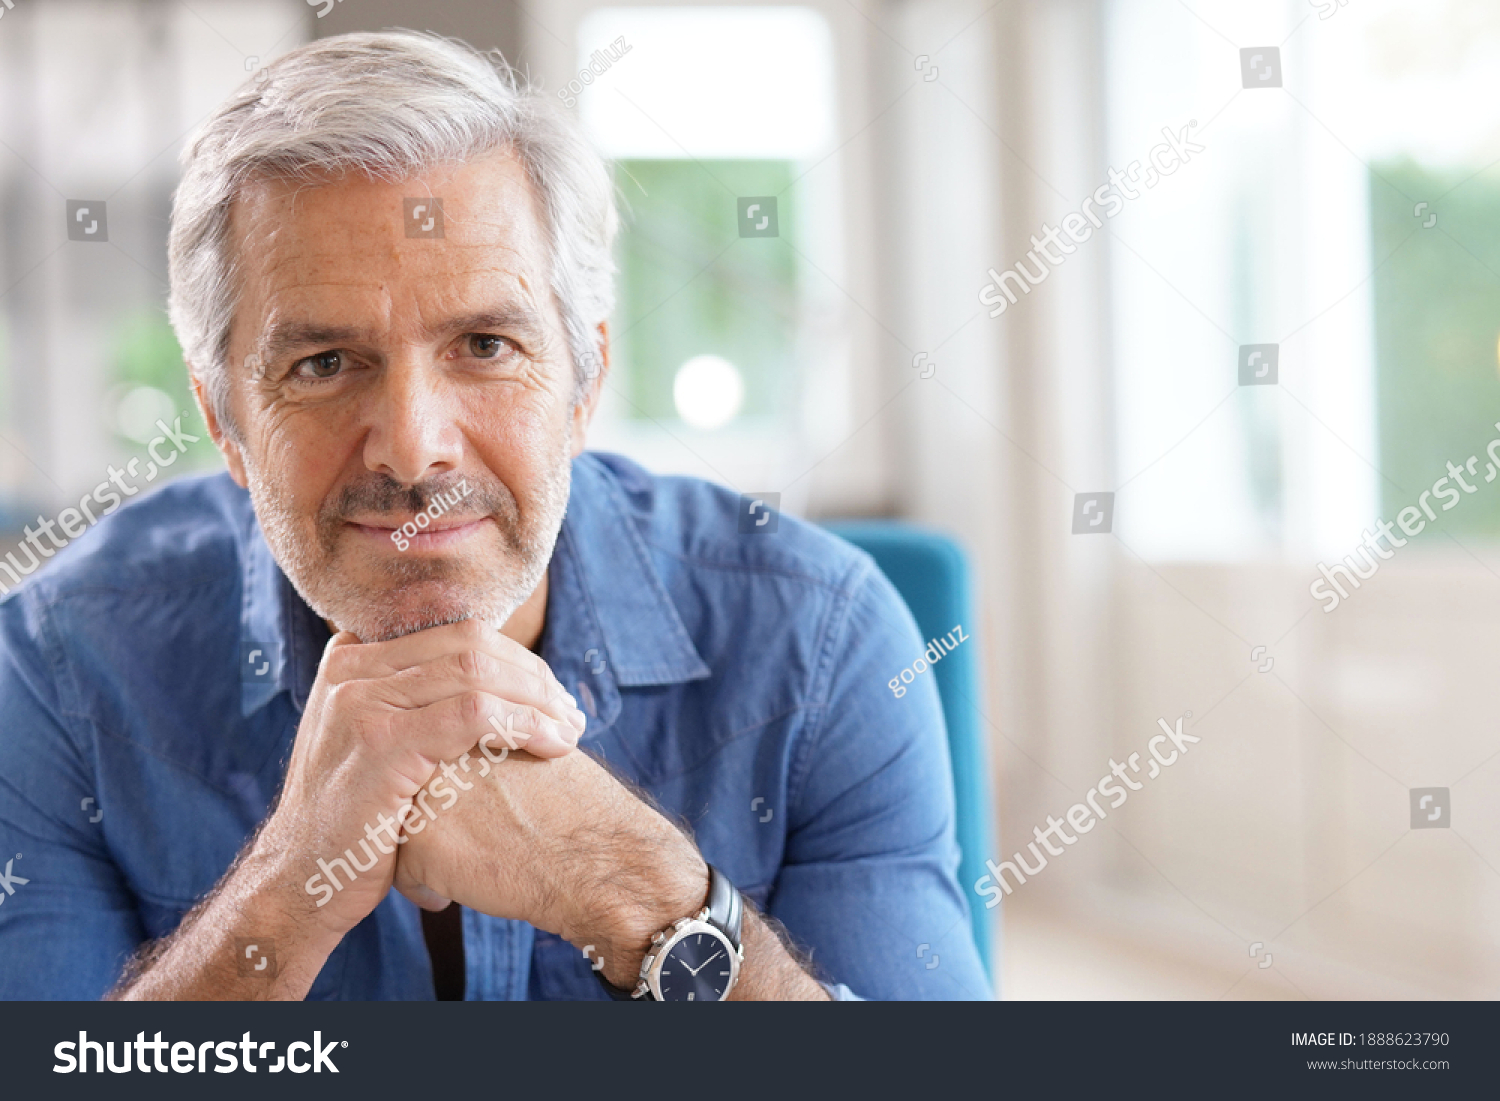 Portrait of 60-year-old man with grey hair and blue shirt looking at camera #1888623790